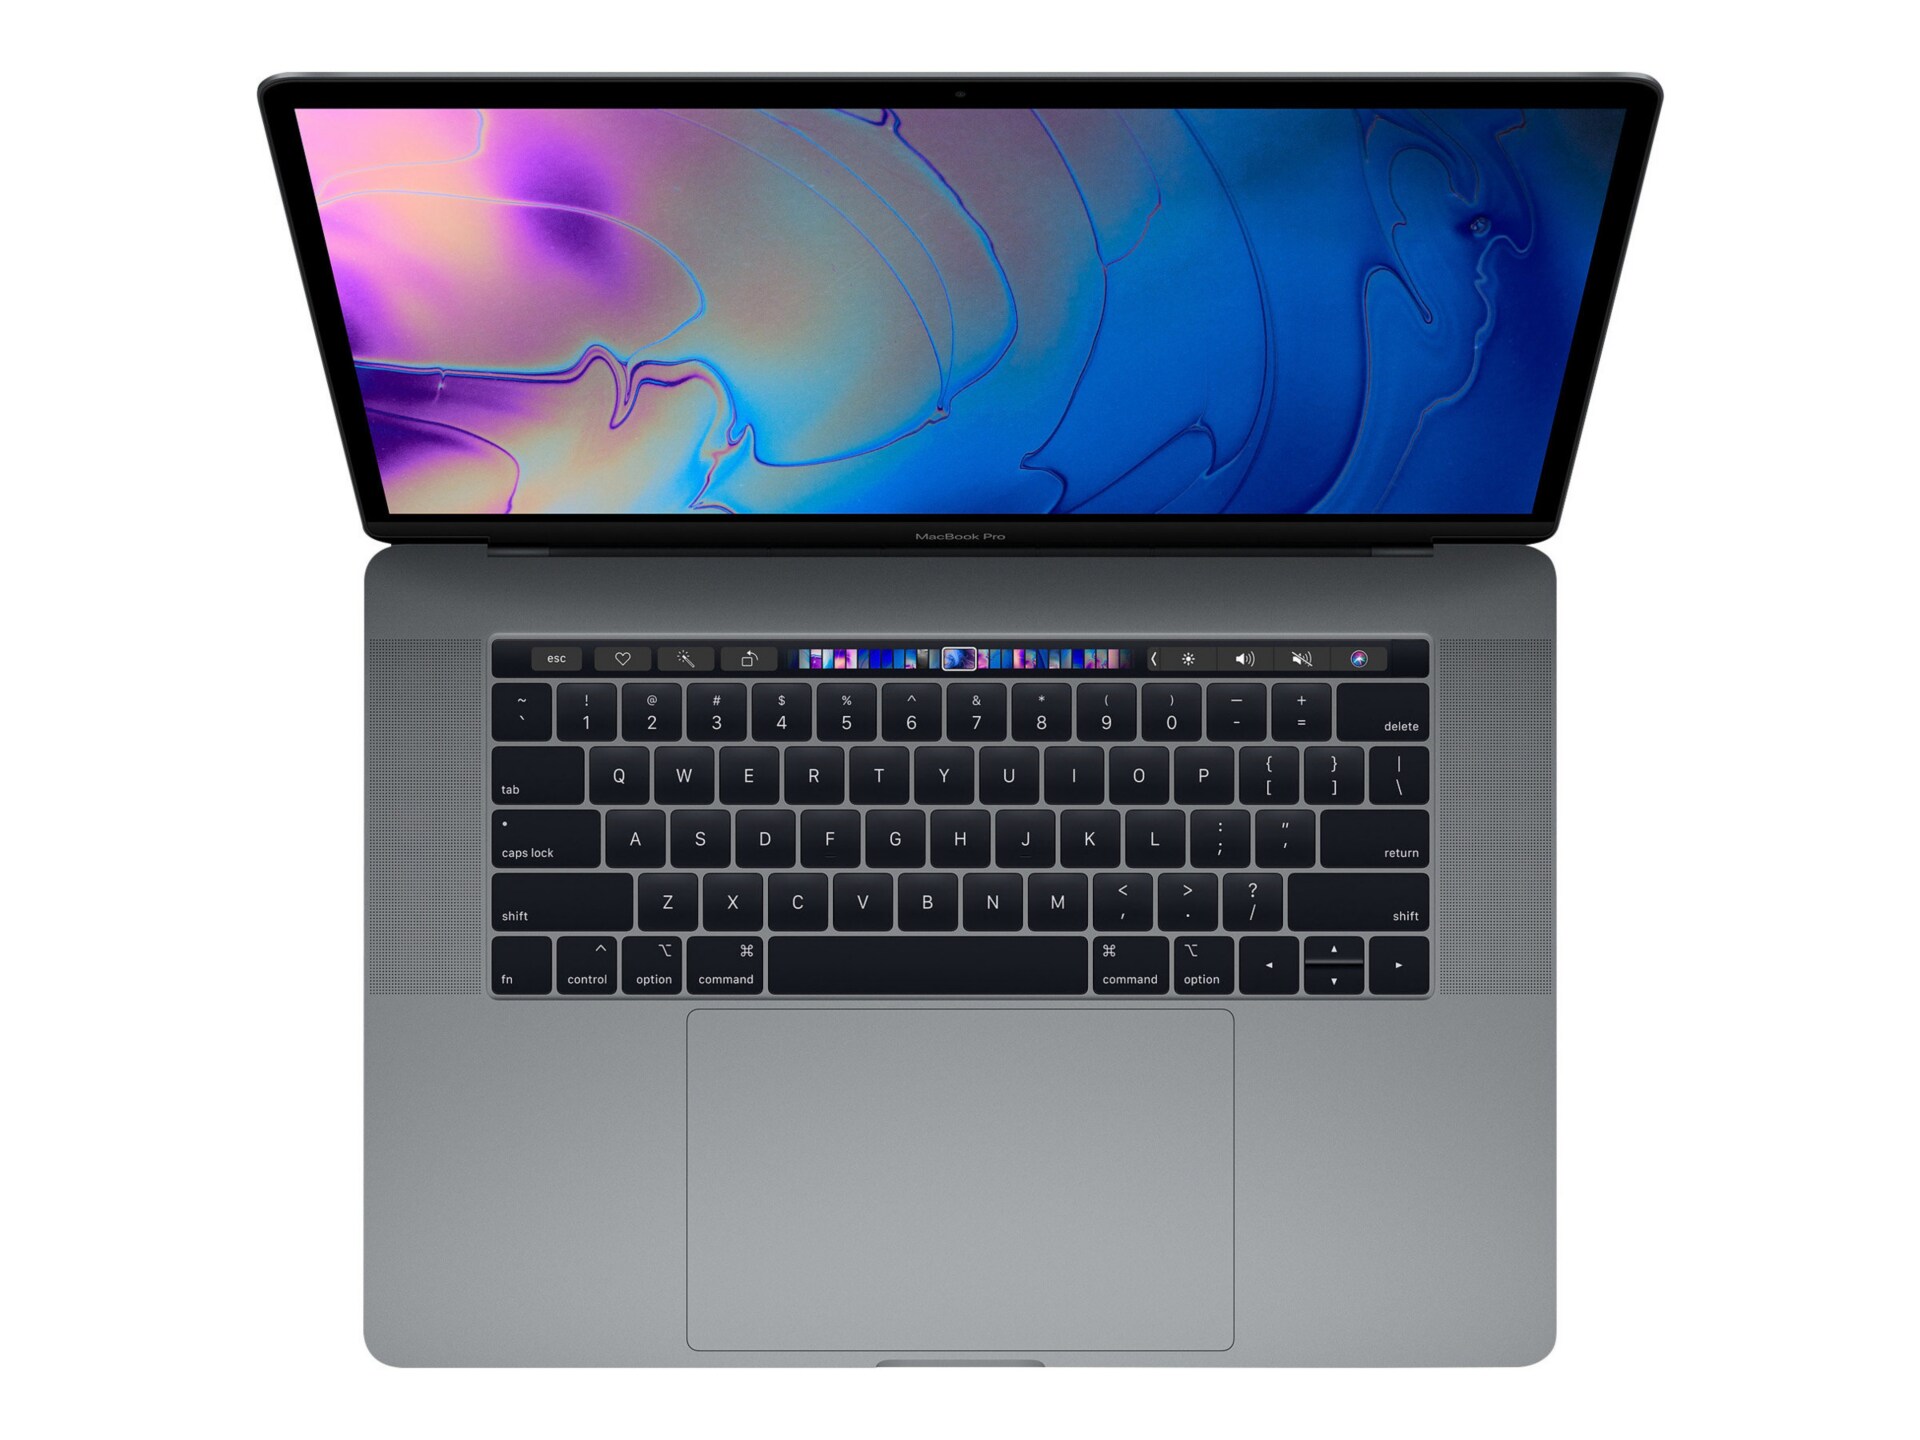 Apple MacBook Pro with Touch Bar - 15.4" - Core i7 - 16 GB RAM - 512 GB SSD - US